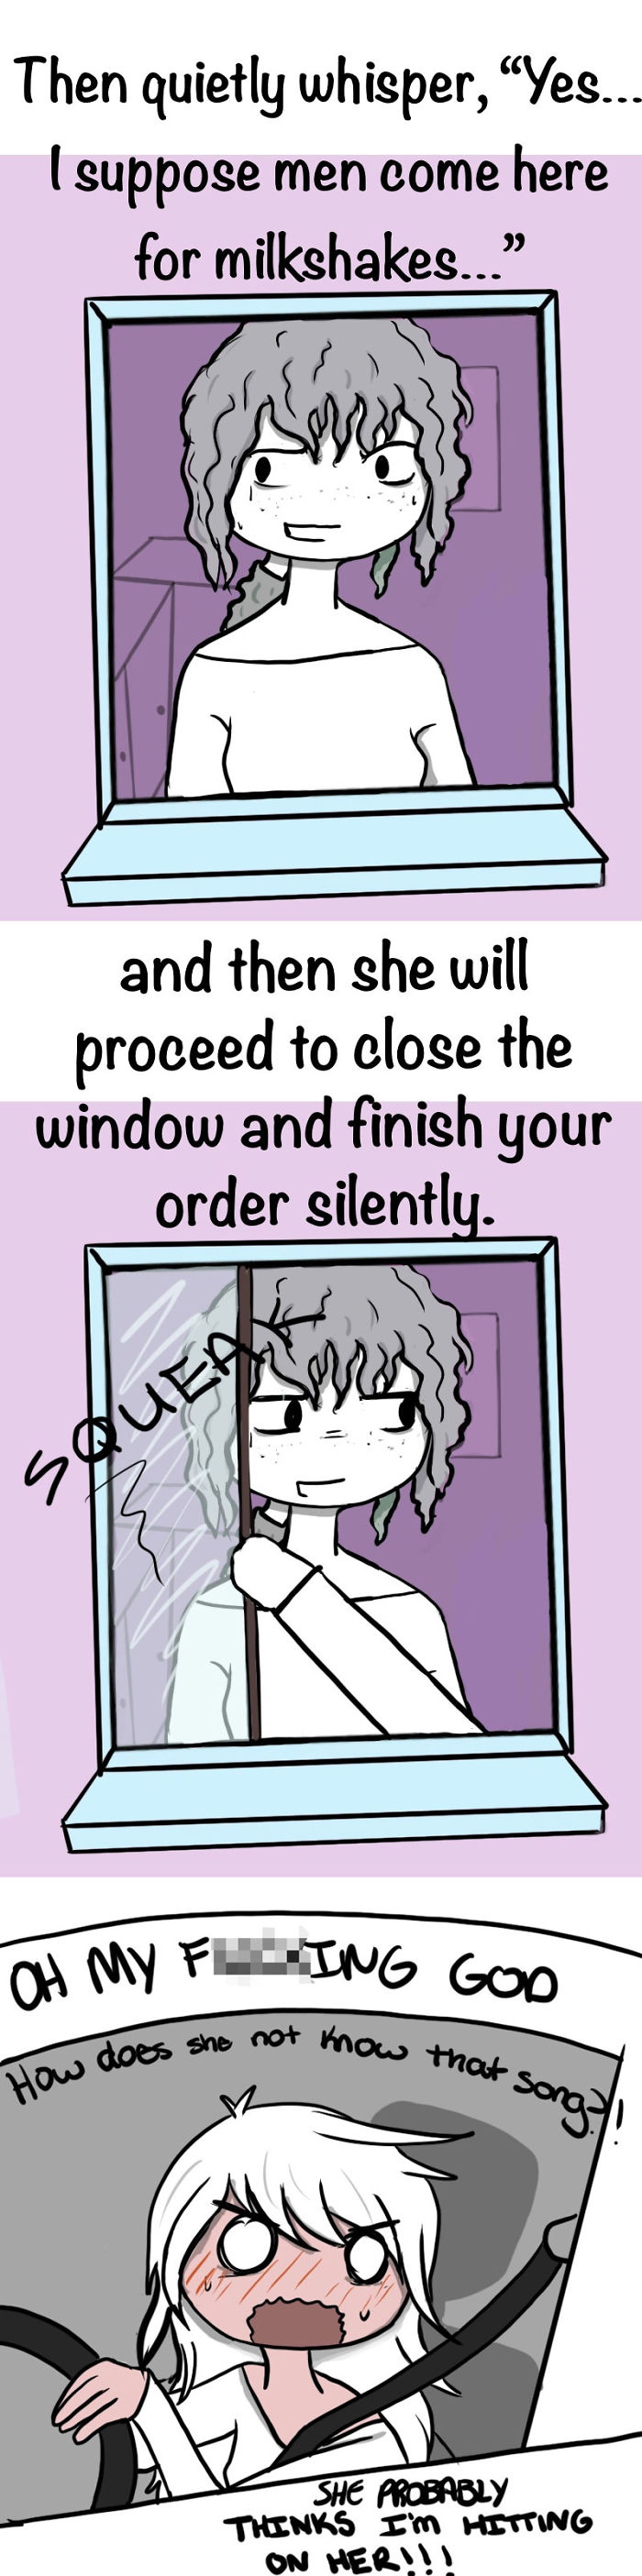 Artist Illustrates Her Everyday Life, And She Really Knows How To Tell Stories (8 Comics)